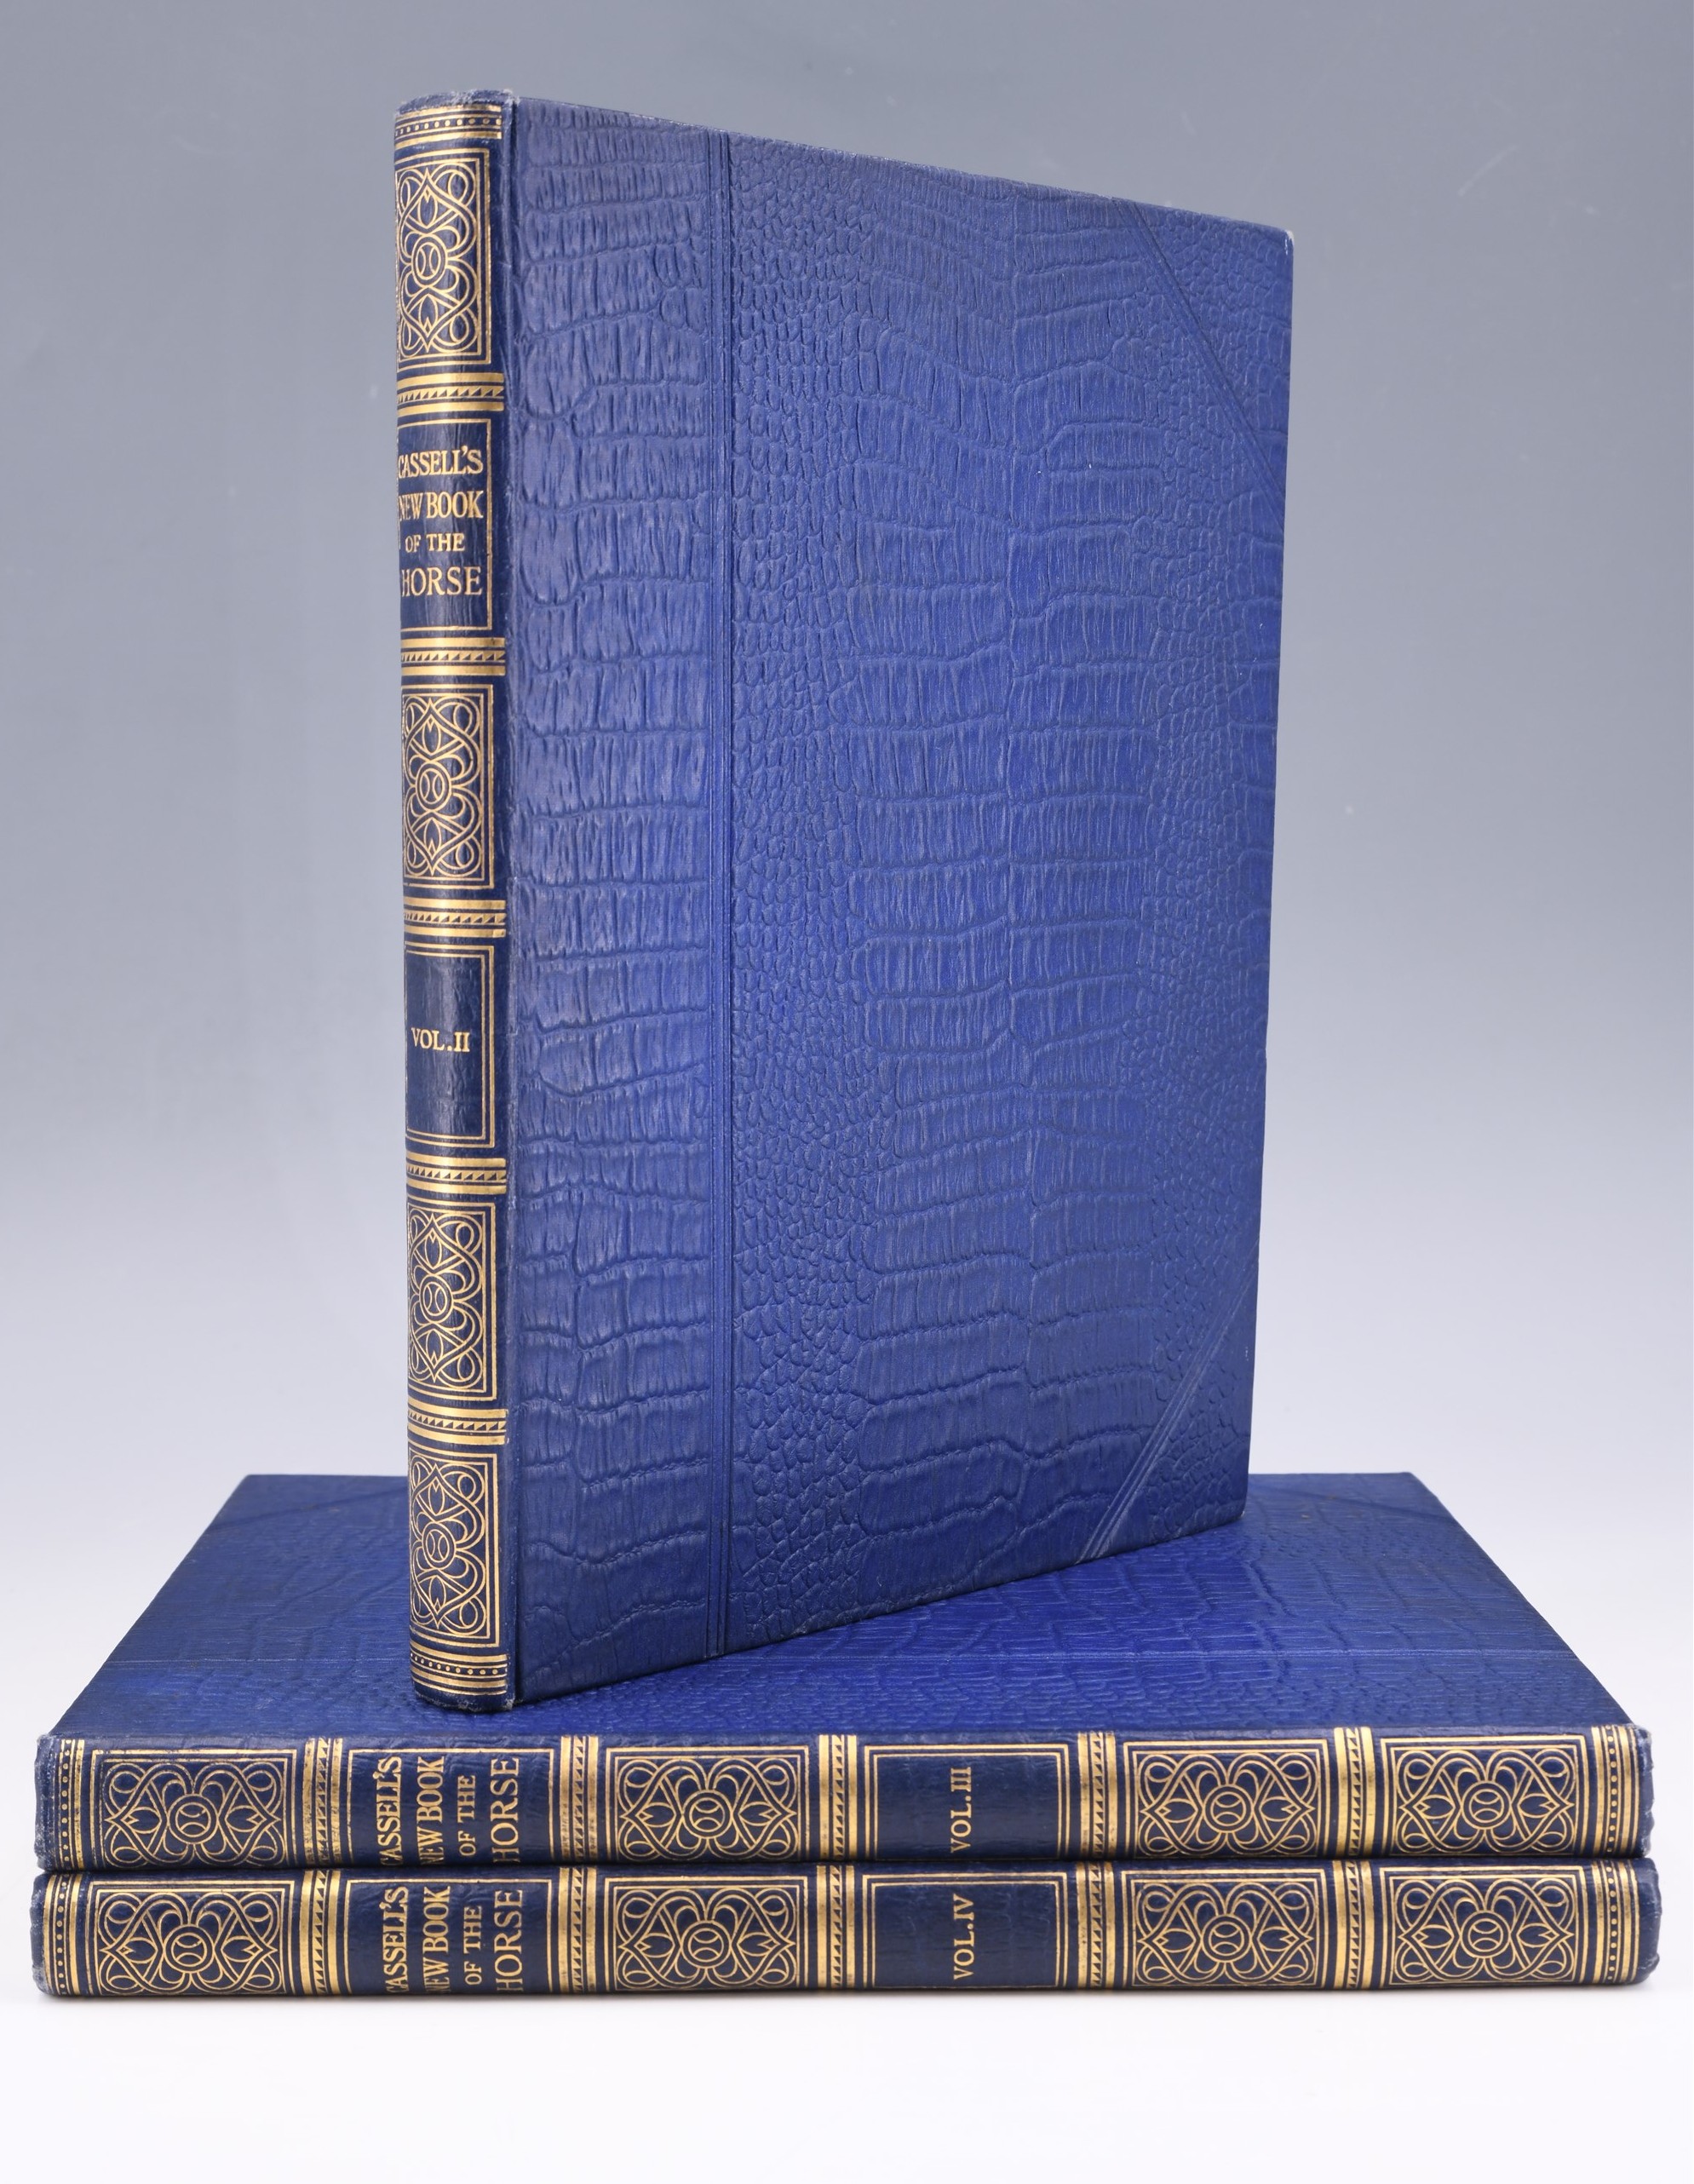 Charles Richardson, "Cassell's New Book of the Horse", three volumes, London, The Waverley Book Co